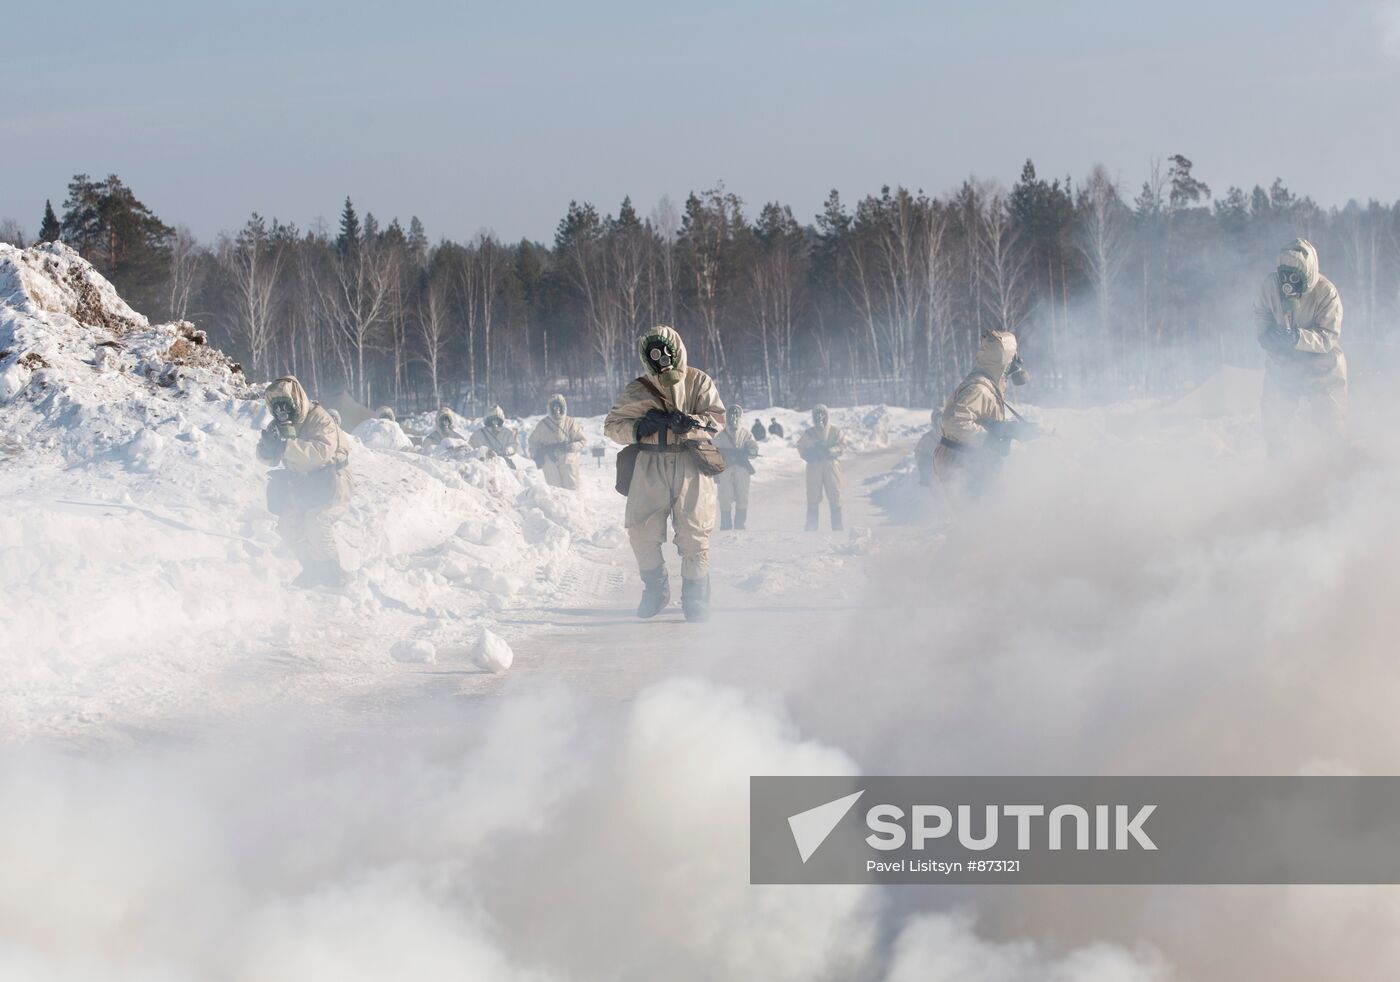 Drills for Radiological, Biological and Chemical Defence Troops